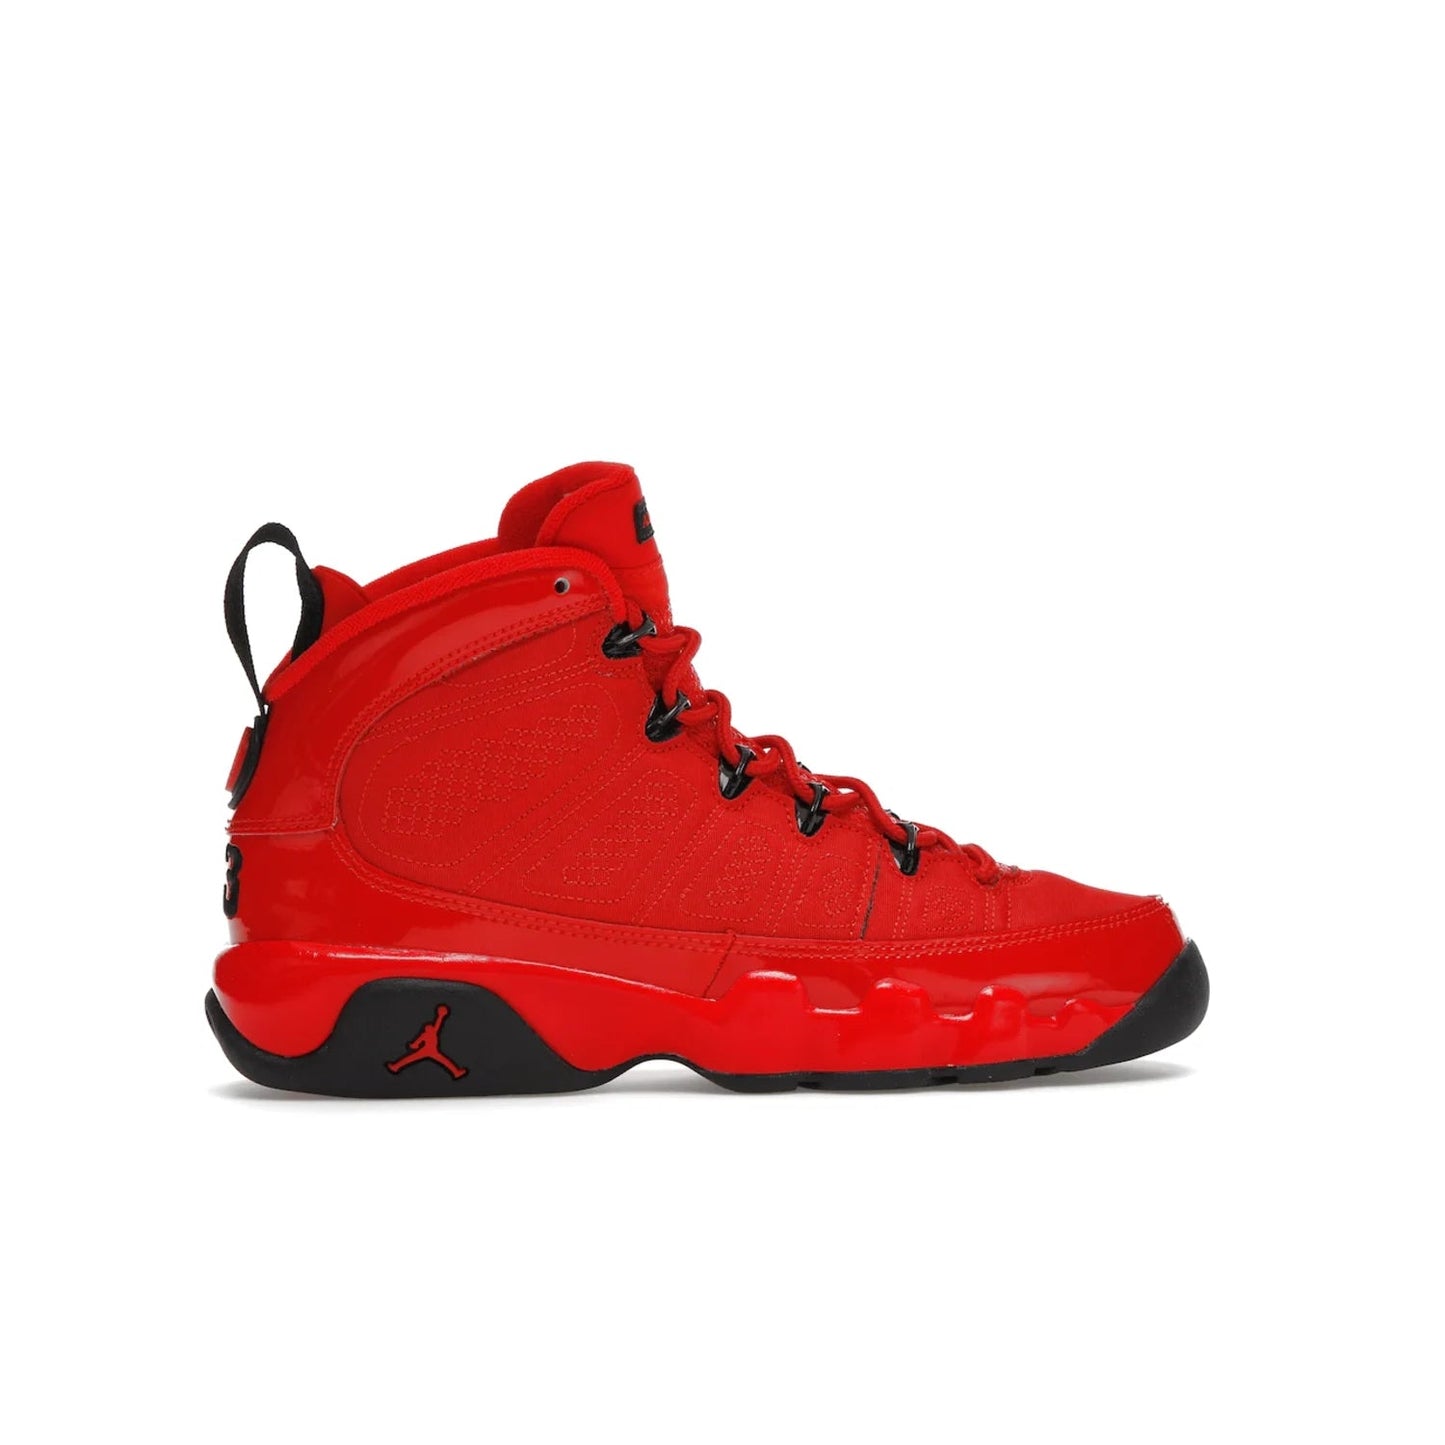 Jordan 9 Retro Chile Red (GS) - Image 36 - Only at www.BallersClubKickz.com - Introducing the Air Jordan 9 Retro Chile Red (GS), a vintage 1993 silhouette with fiery colorway. Features quilted side paneling, glossy patent leather, pull tabs, black contrast accents, and foam midsole. Launching May 2022 for $140.